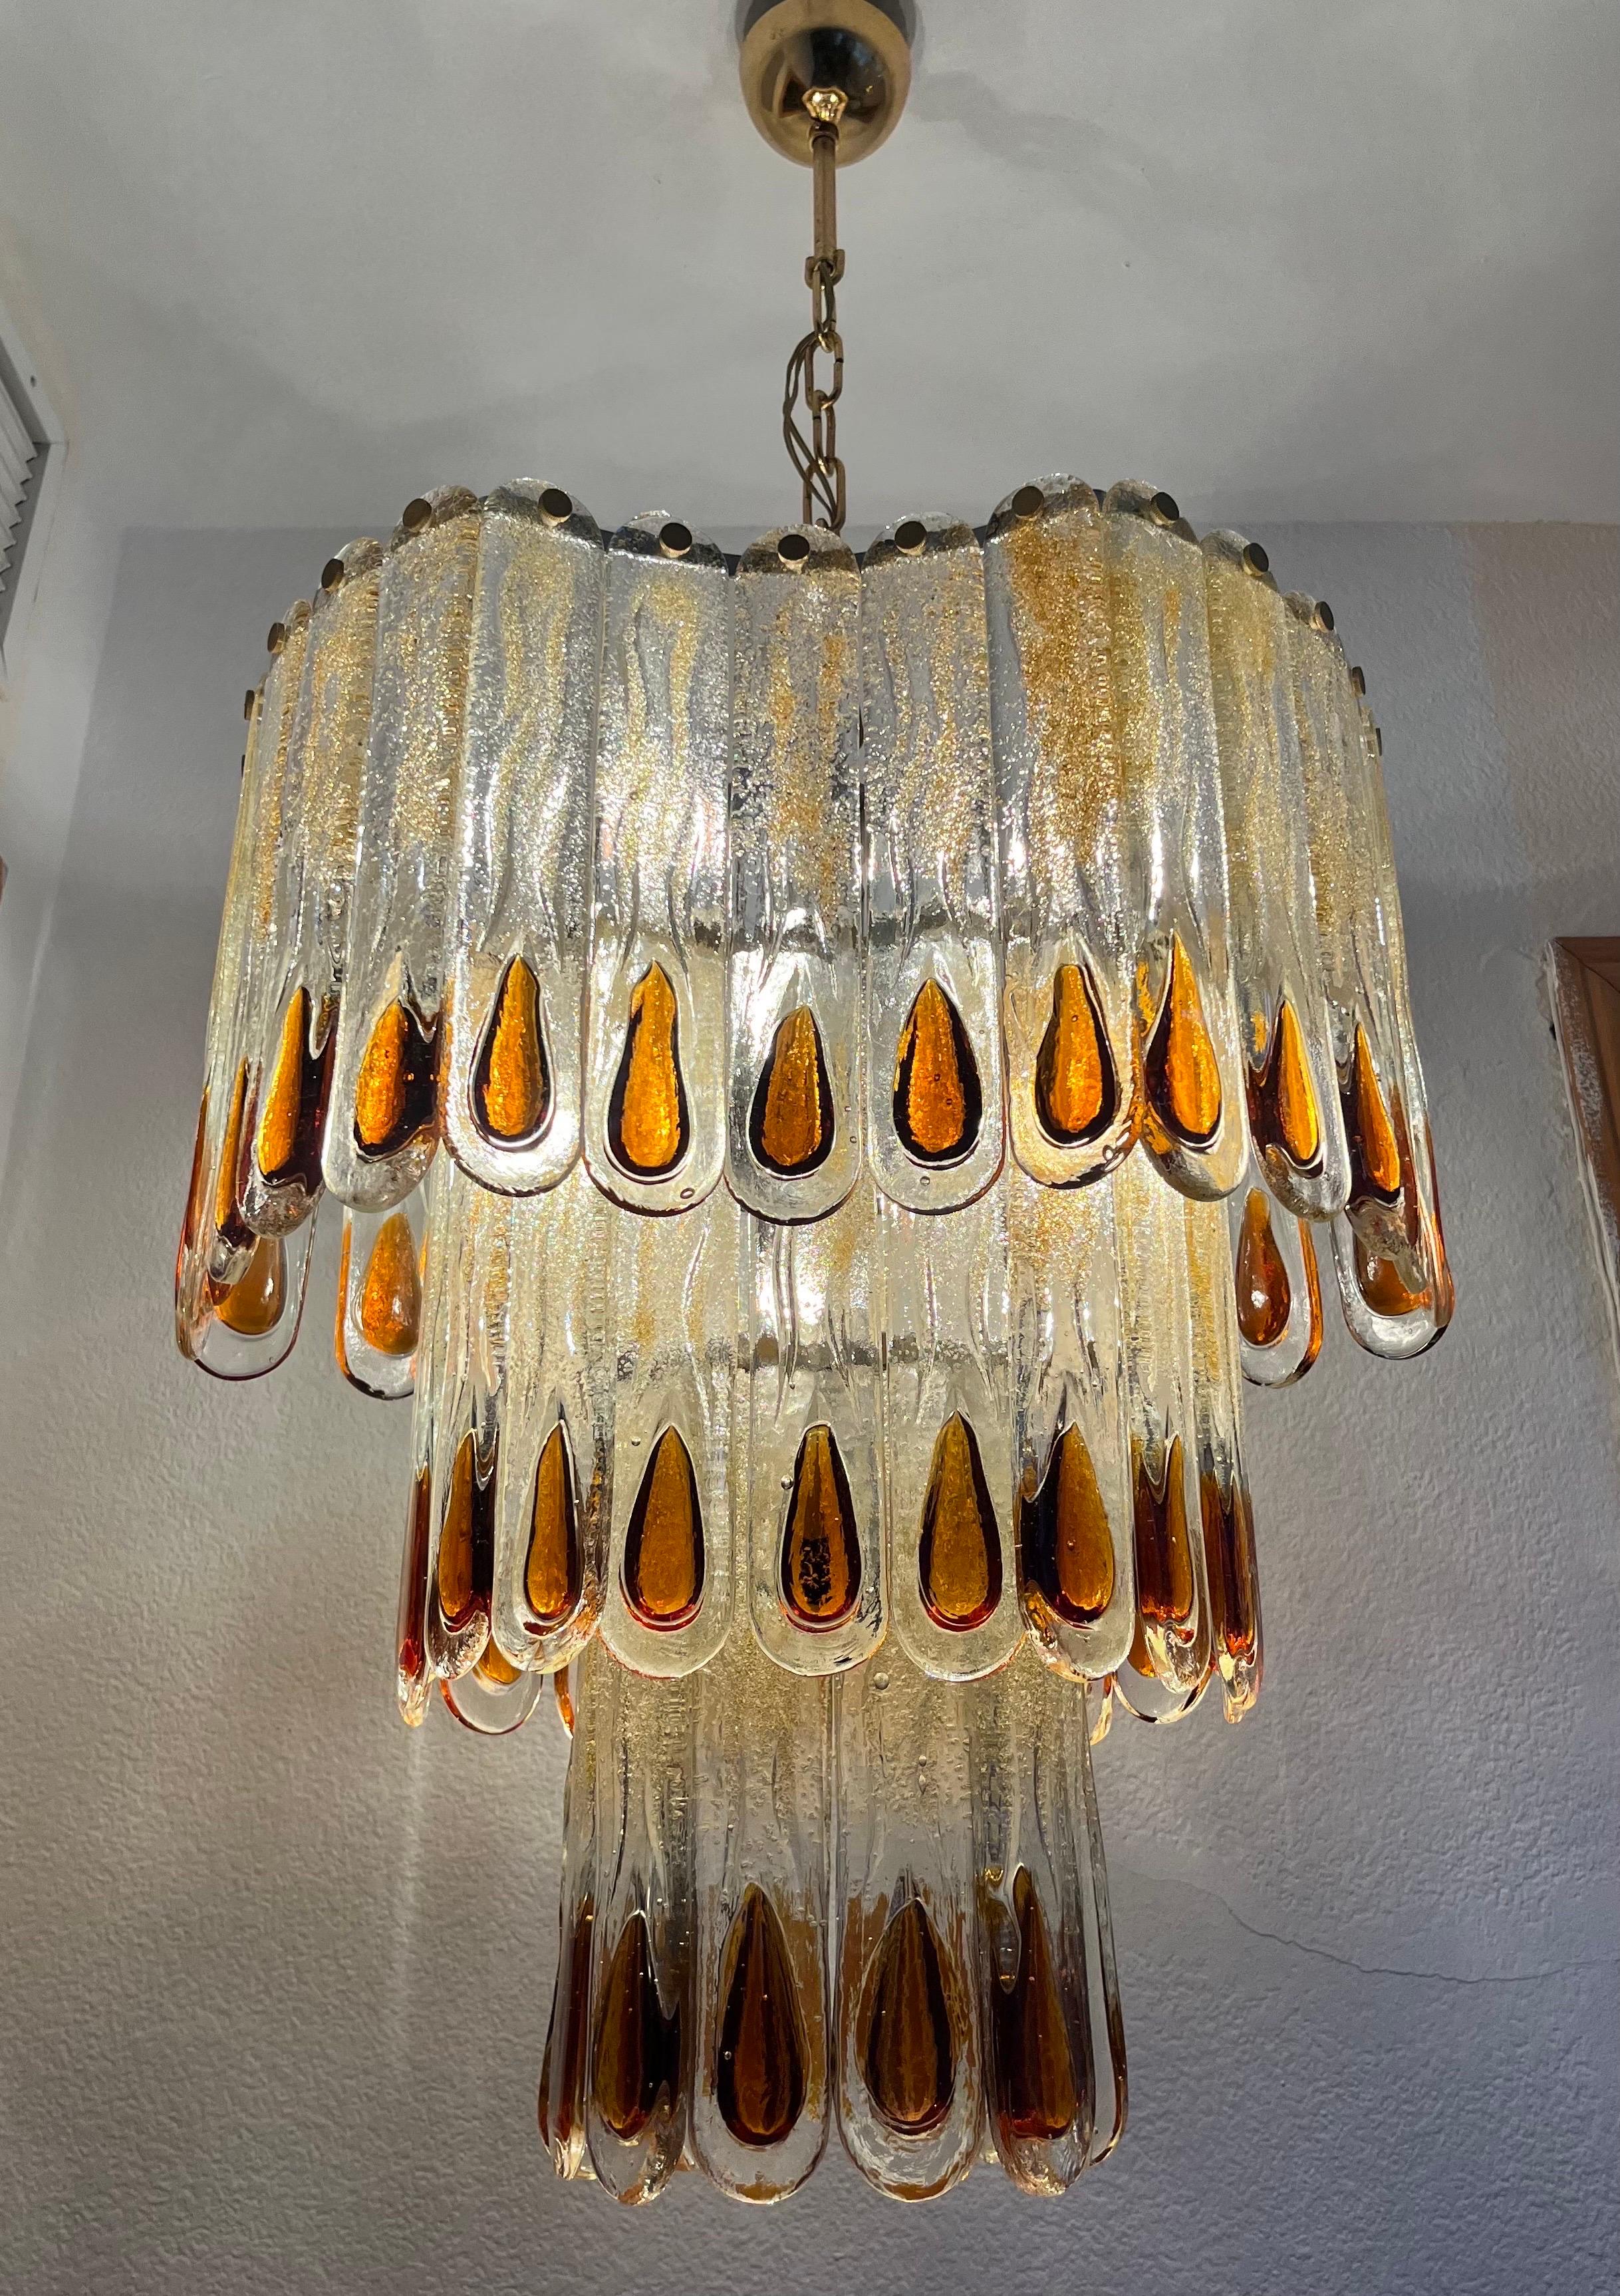 This marvelous and beauty Murano chandelier belongs to a Sicilian Palazzo.
This fixture was made during the 1970s in Italy for the Venice Company “Mazzega”.
Mazzega lie in the noble Venetian glassworking tradition; the firm was founded Angelo